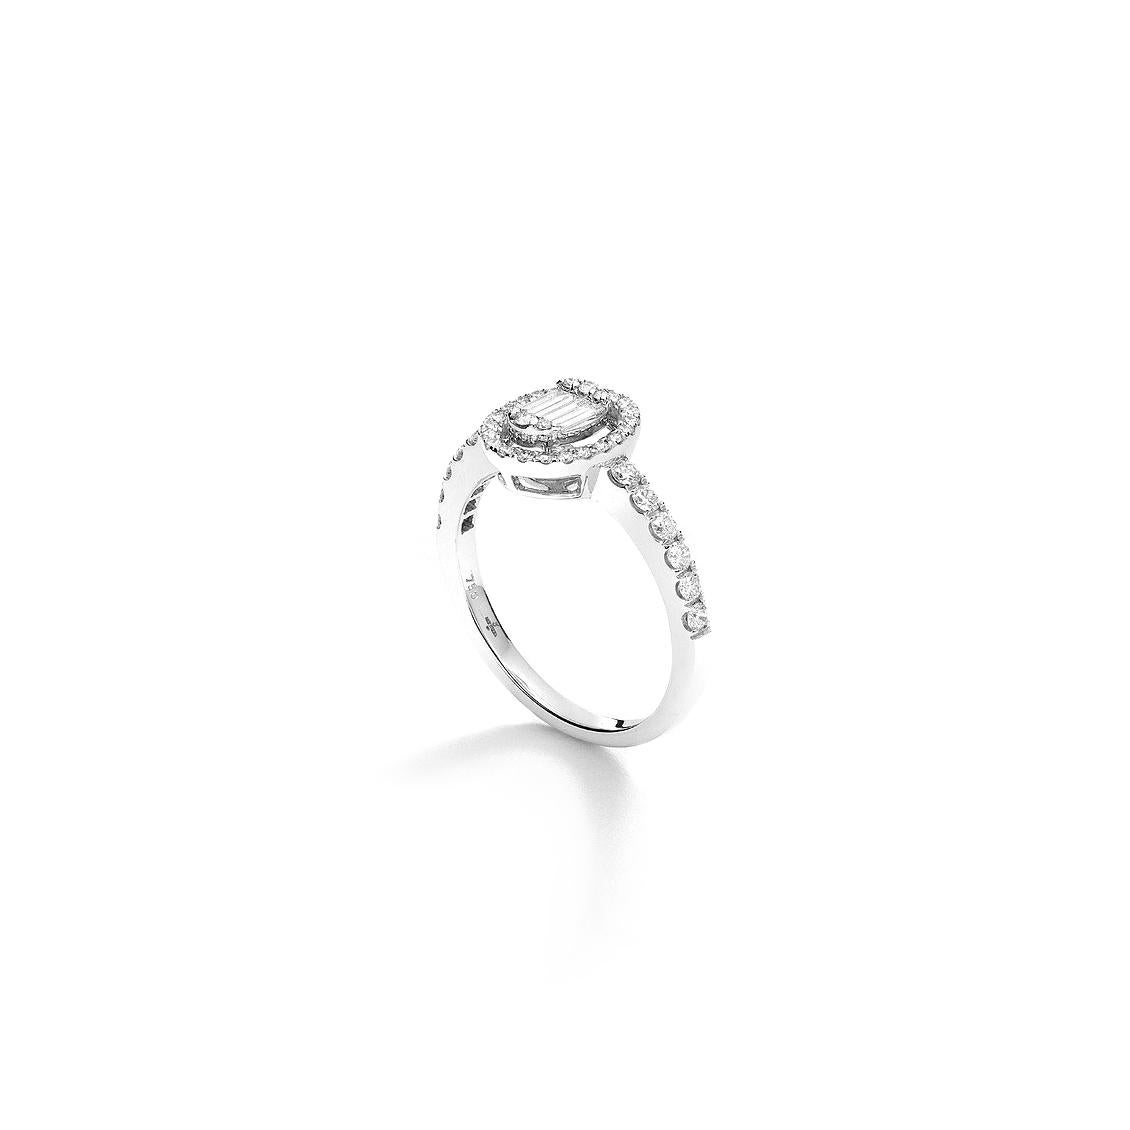 Ring in 18kt white gold set with 40 diamonds 0.42 cts and 3 baguette cut diamonds 0.11 cts          